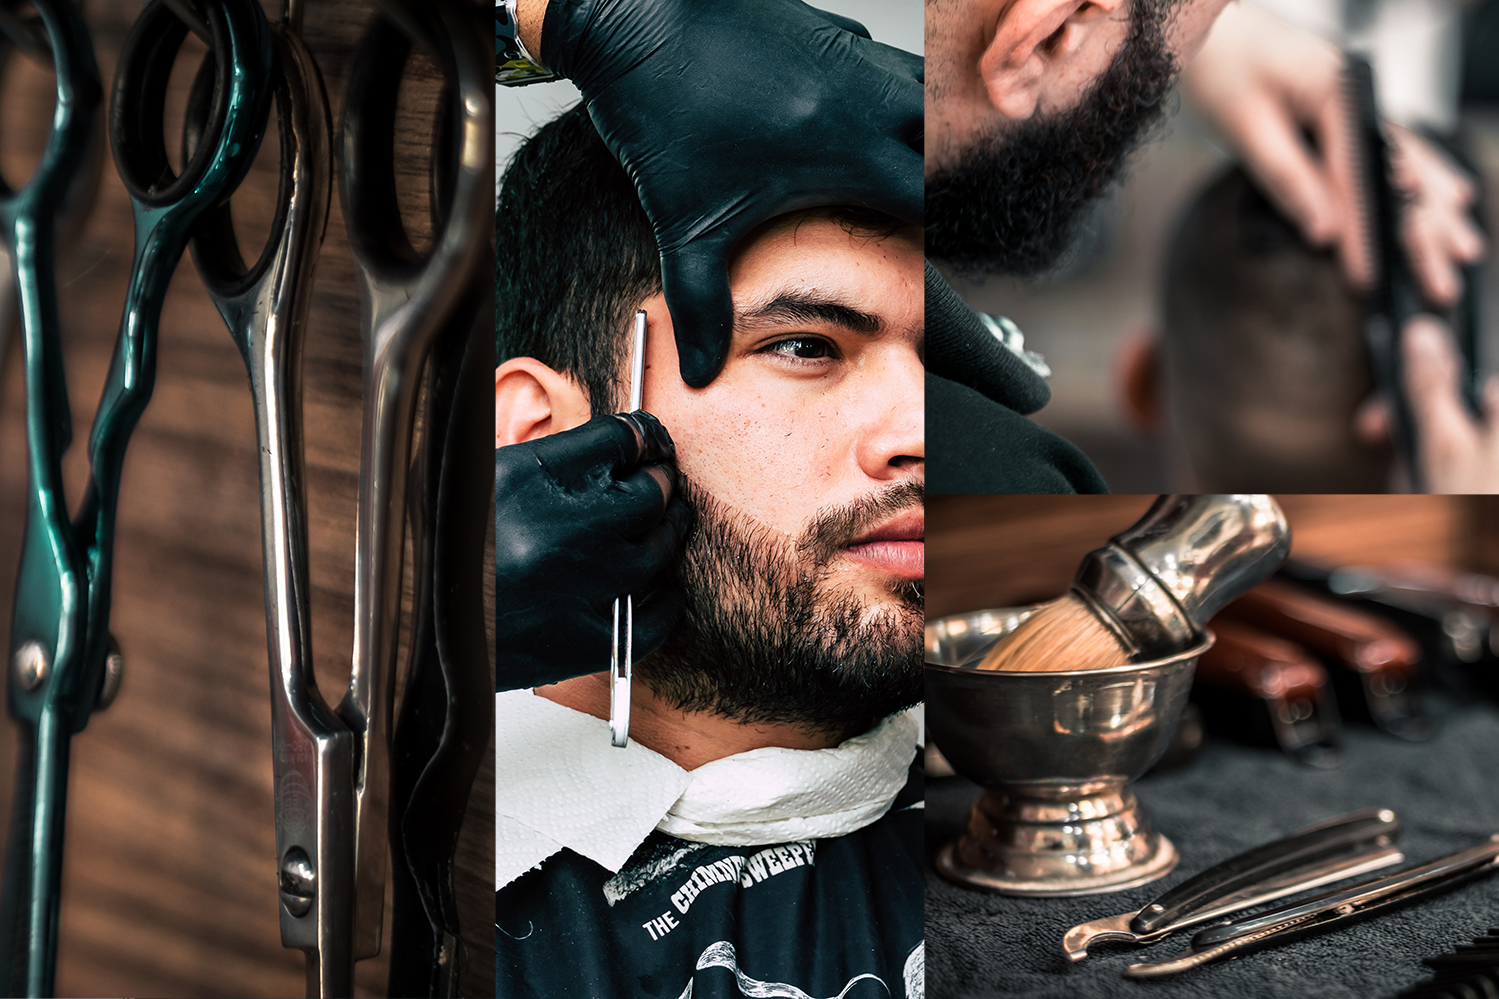 a collage of different barbering pictures including scissors, shaving supplies, a man cutting hair